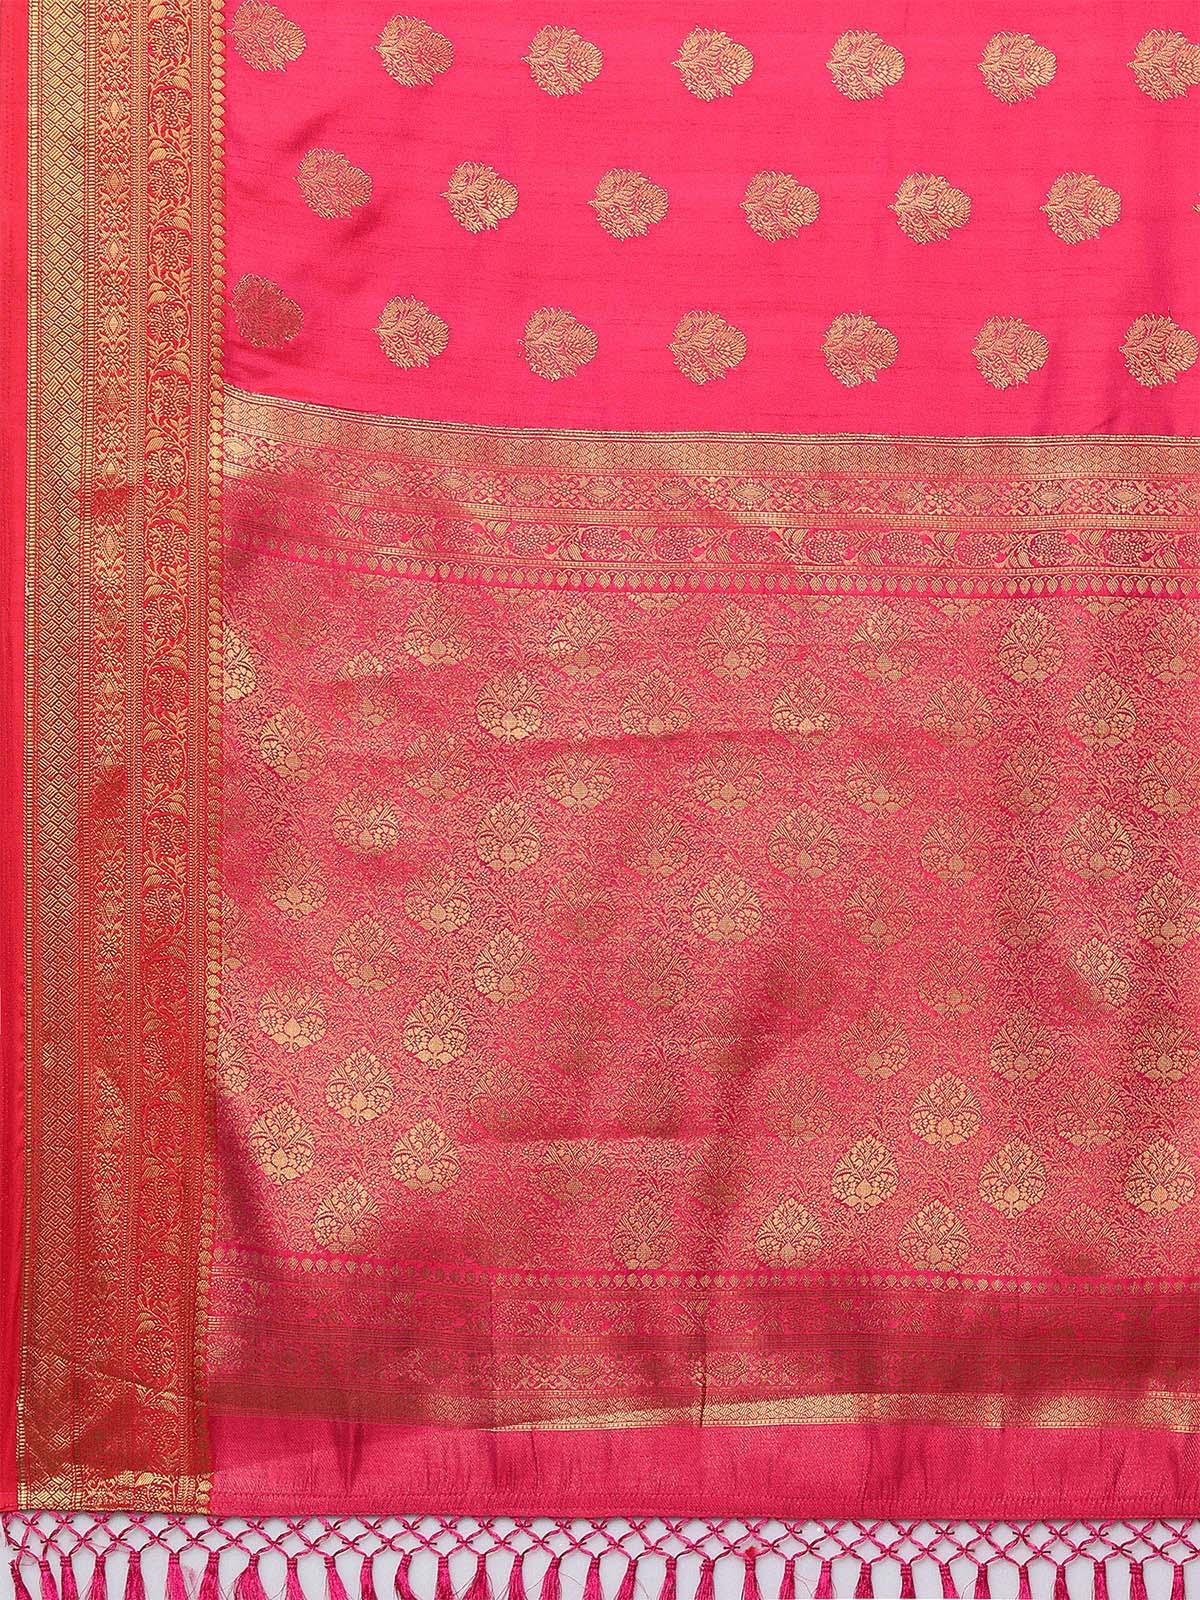 Women's Pink Party Wear Silk Blend Woven Design Saree With Unstitched Blouse - Odette